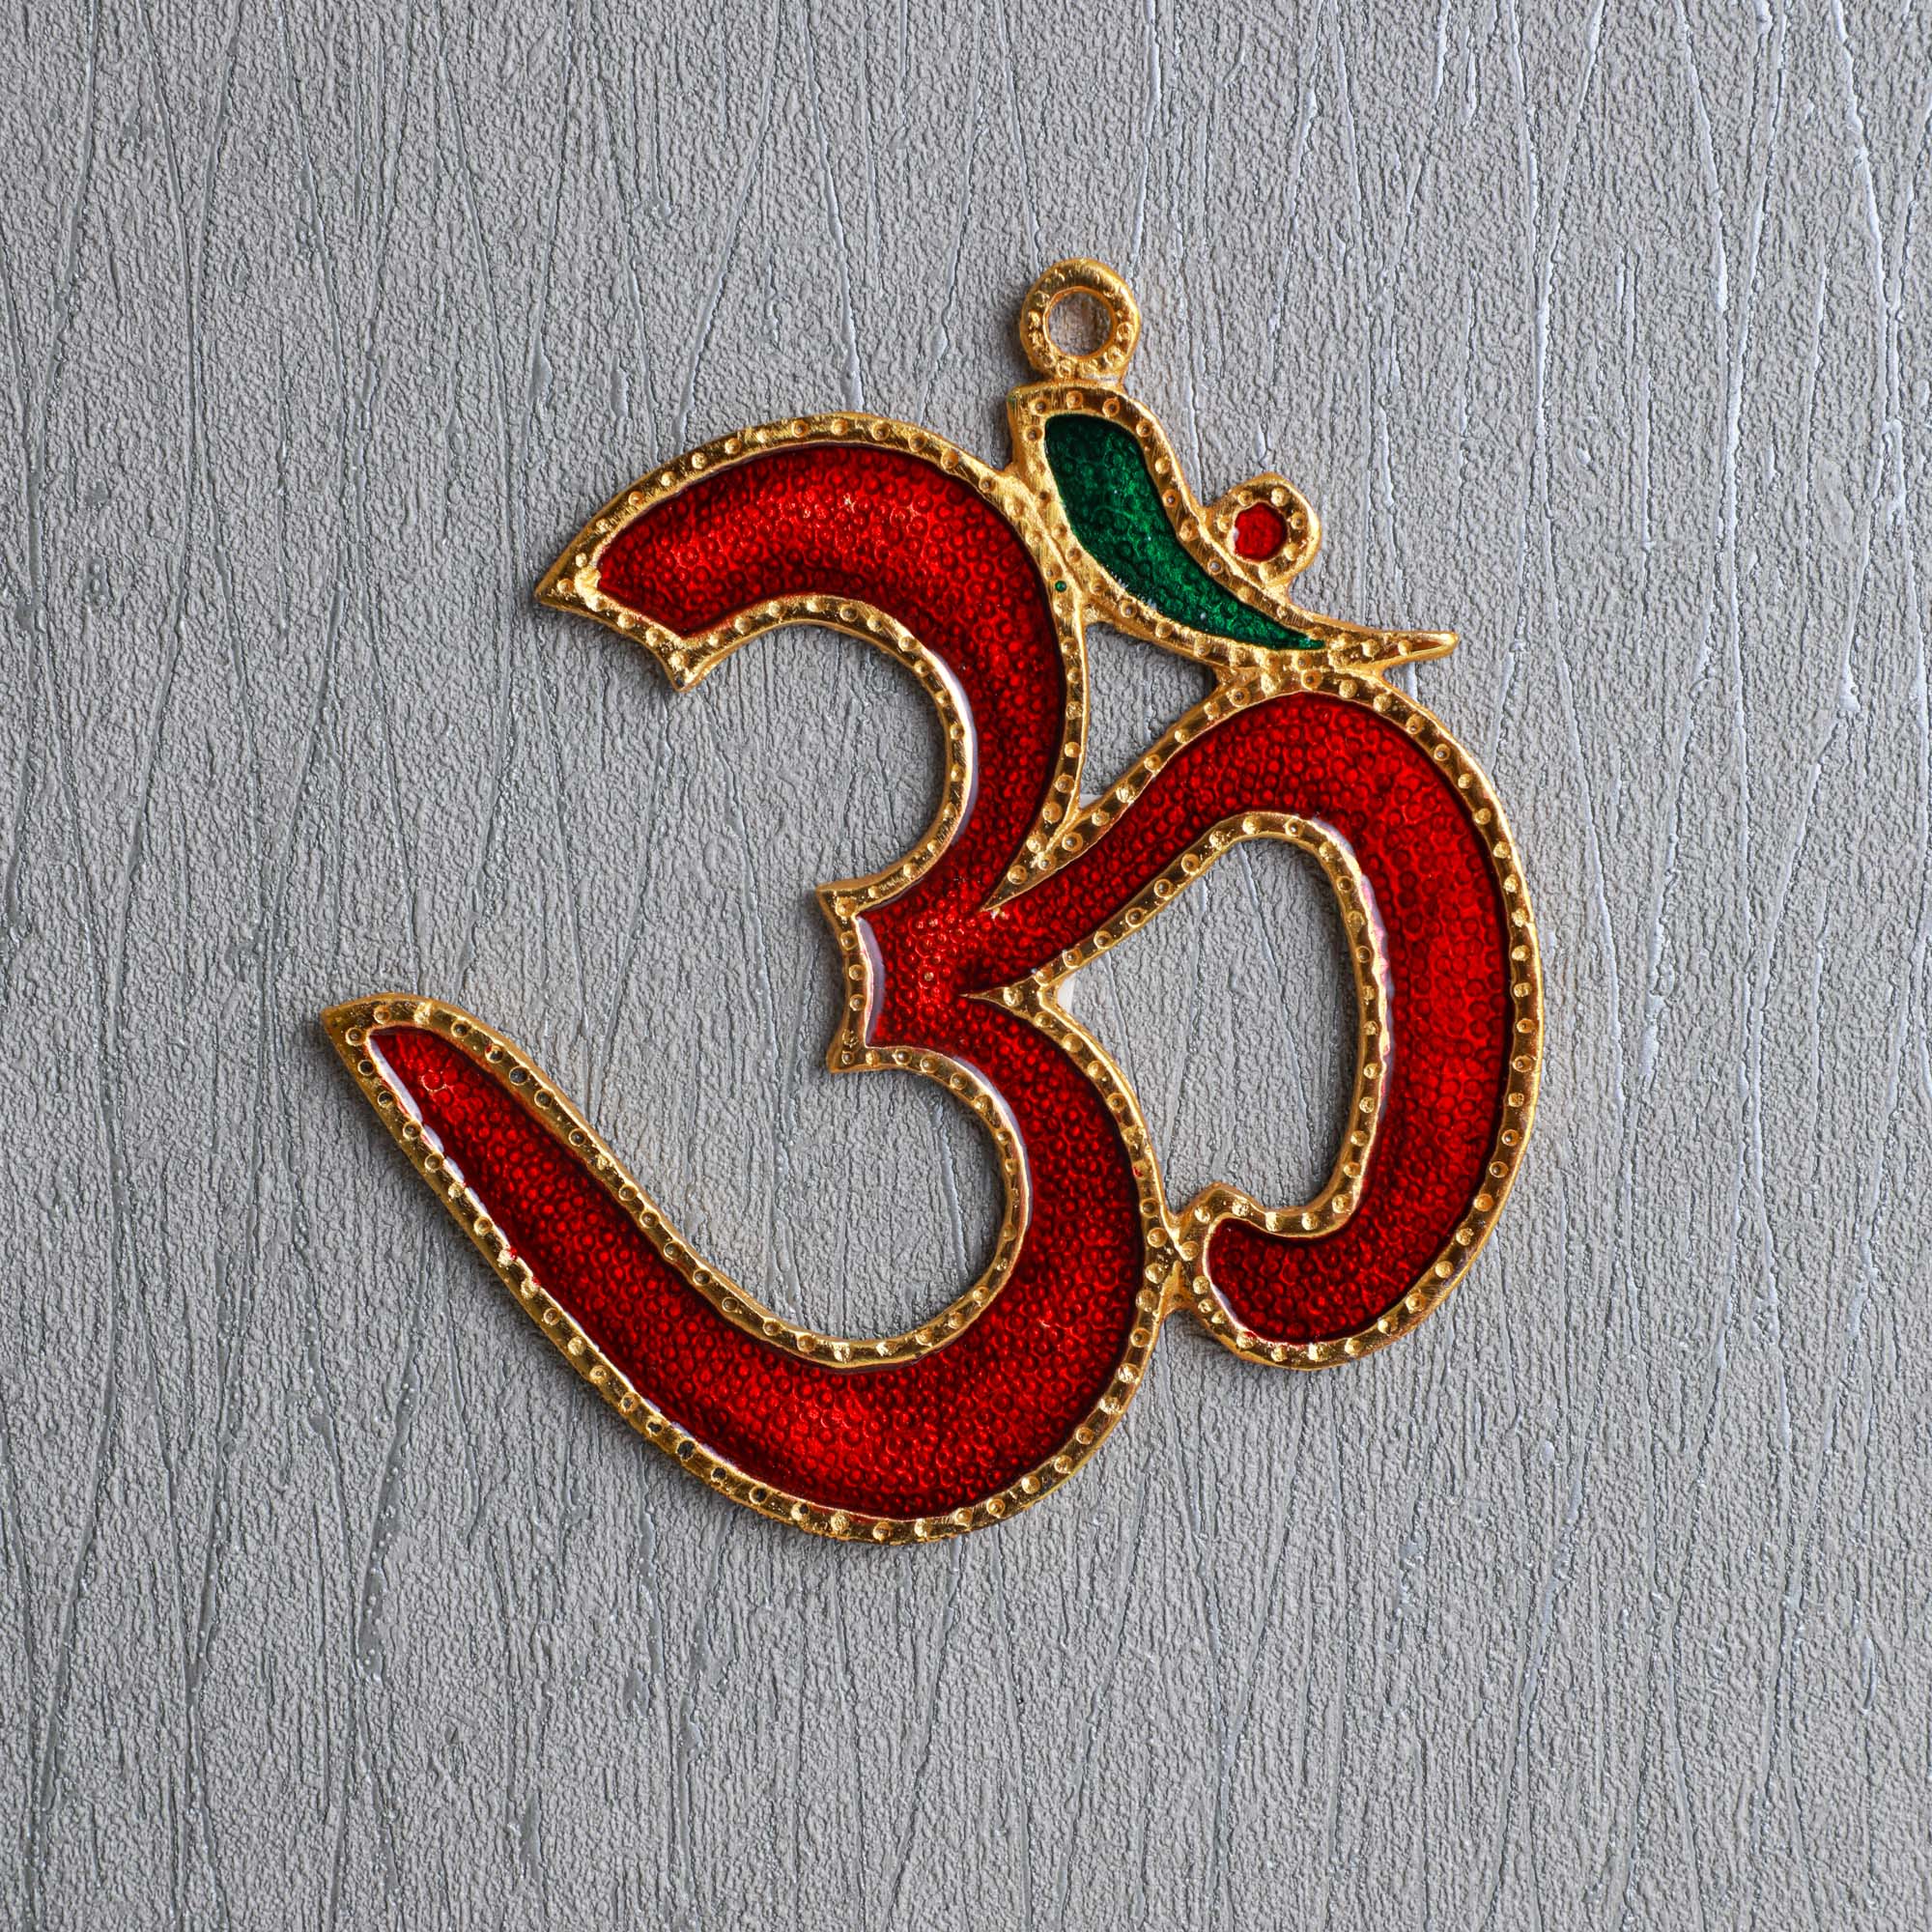 Om pendant nazarbandh for home and entryway